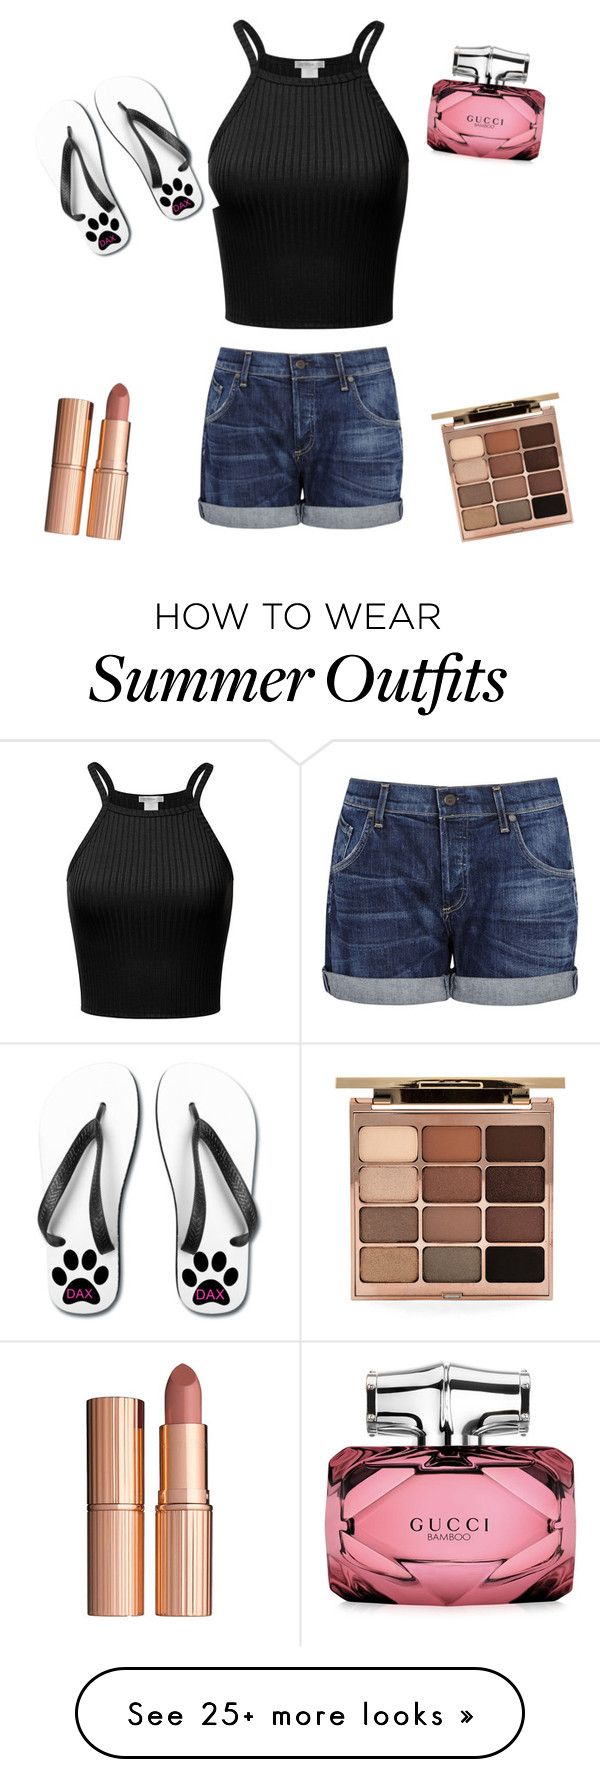 "Summer outfit#2" by biahartmann07 on Polyvore featuring Citizens of H...